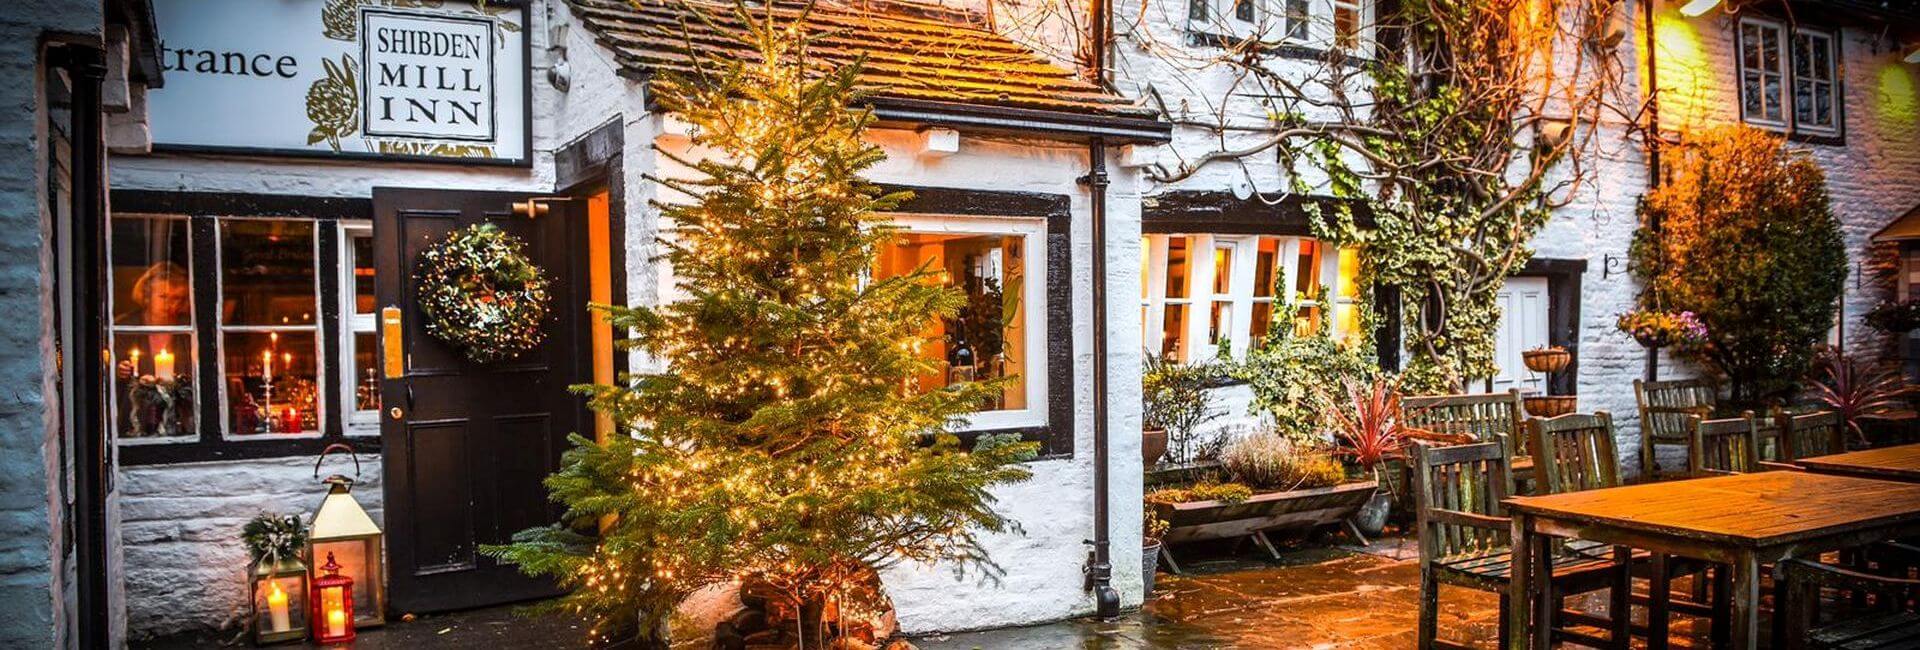 Entrance with Christmas tree in front of the Shibden Mill Inn